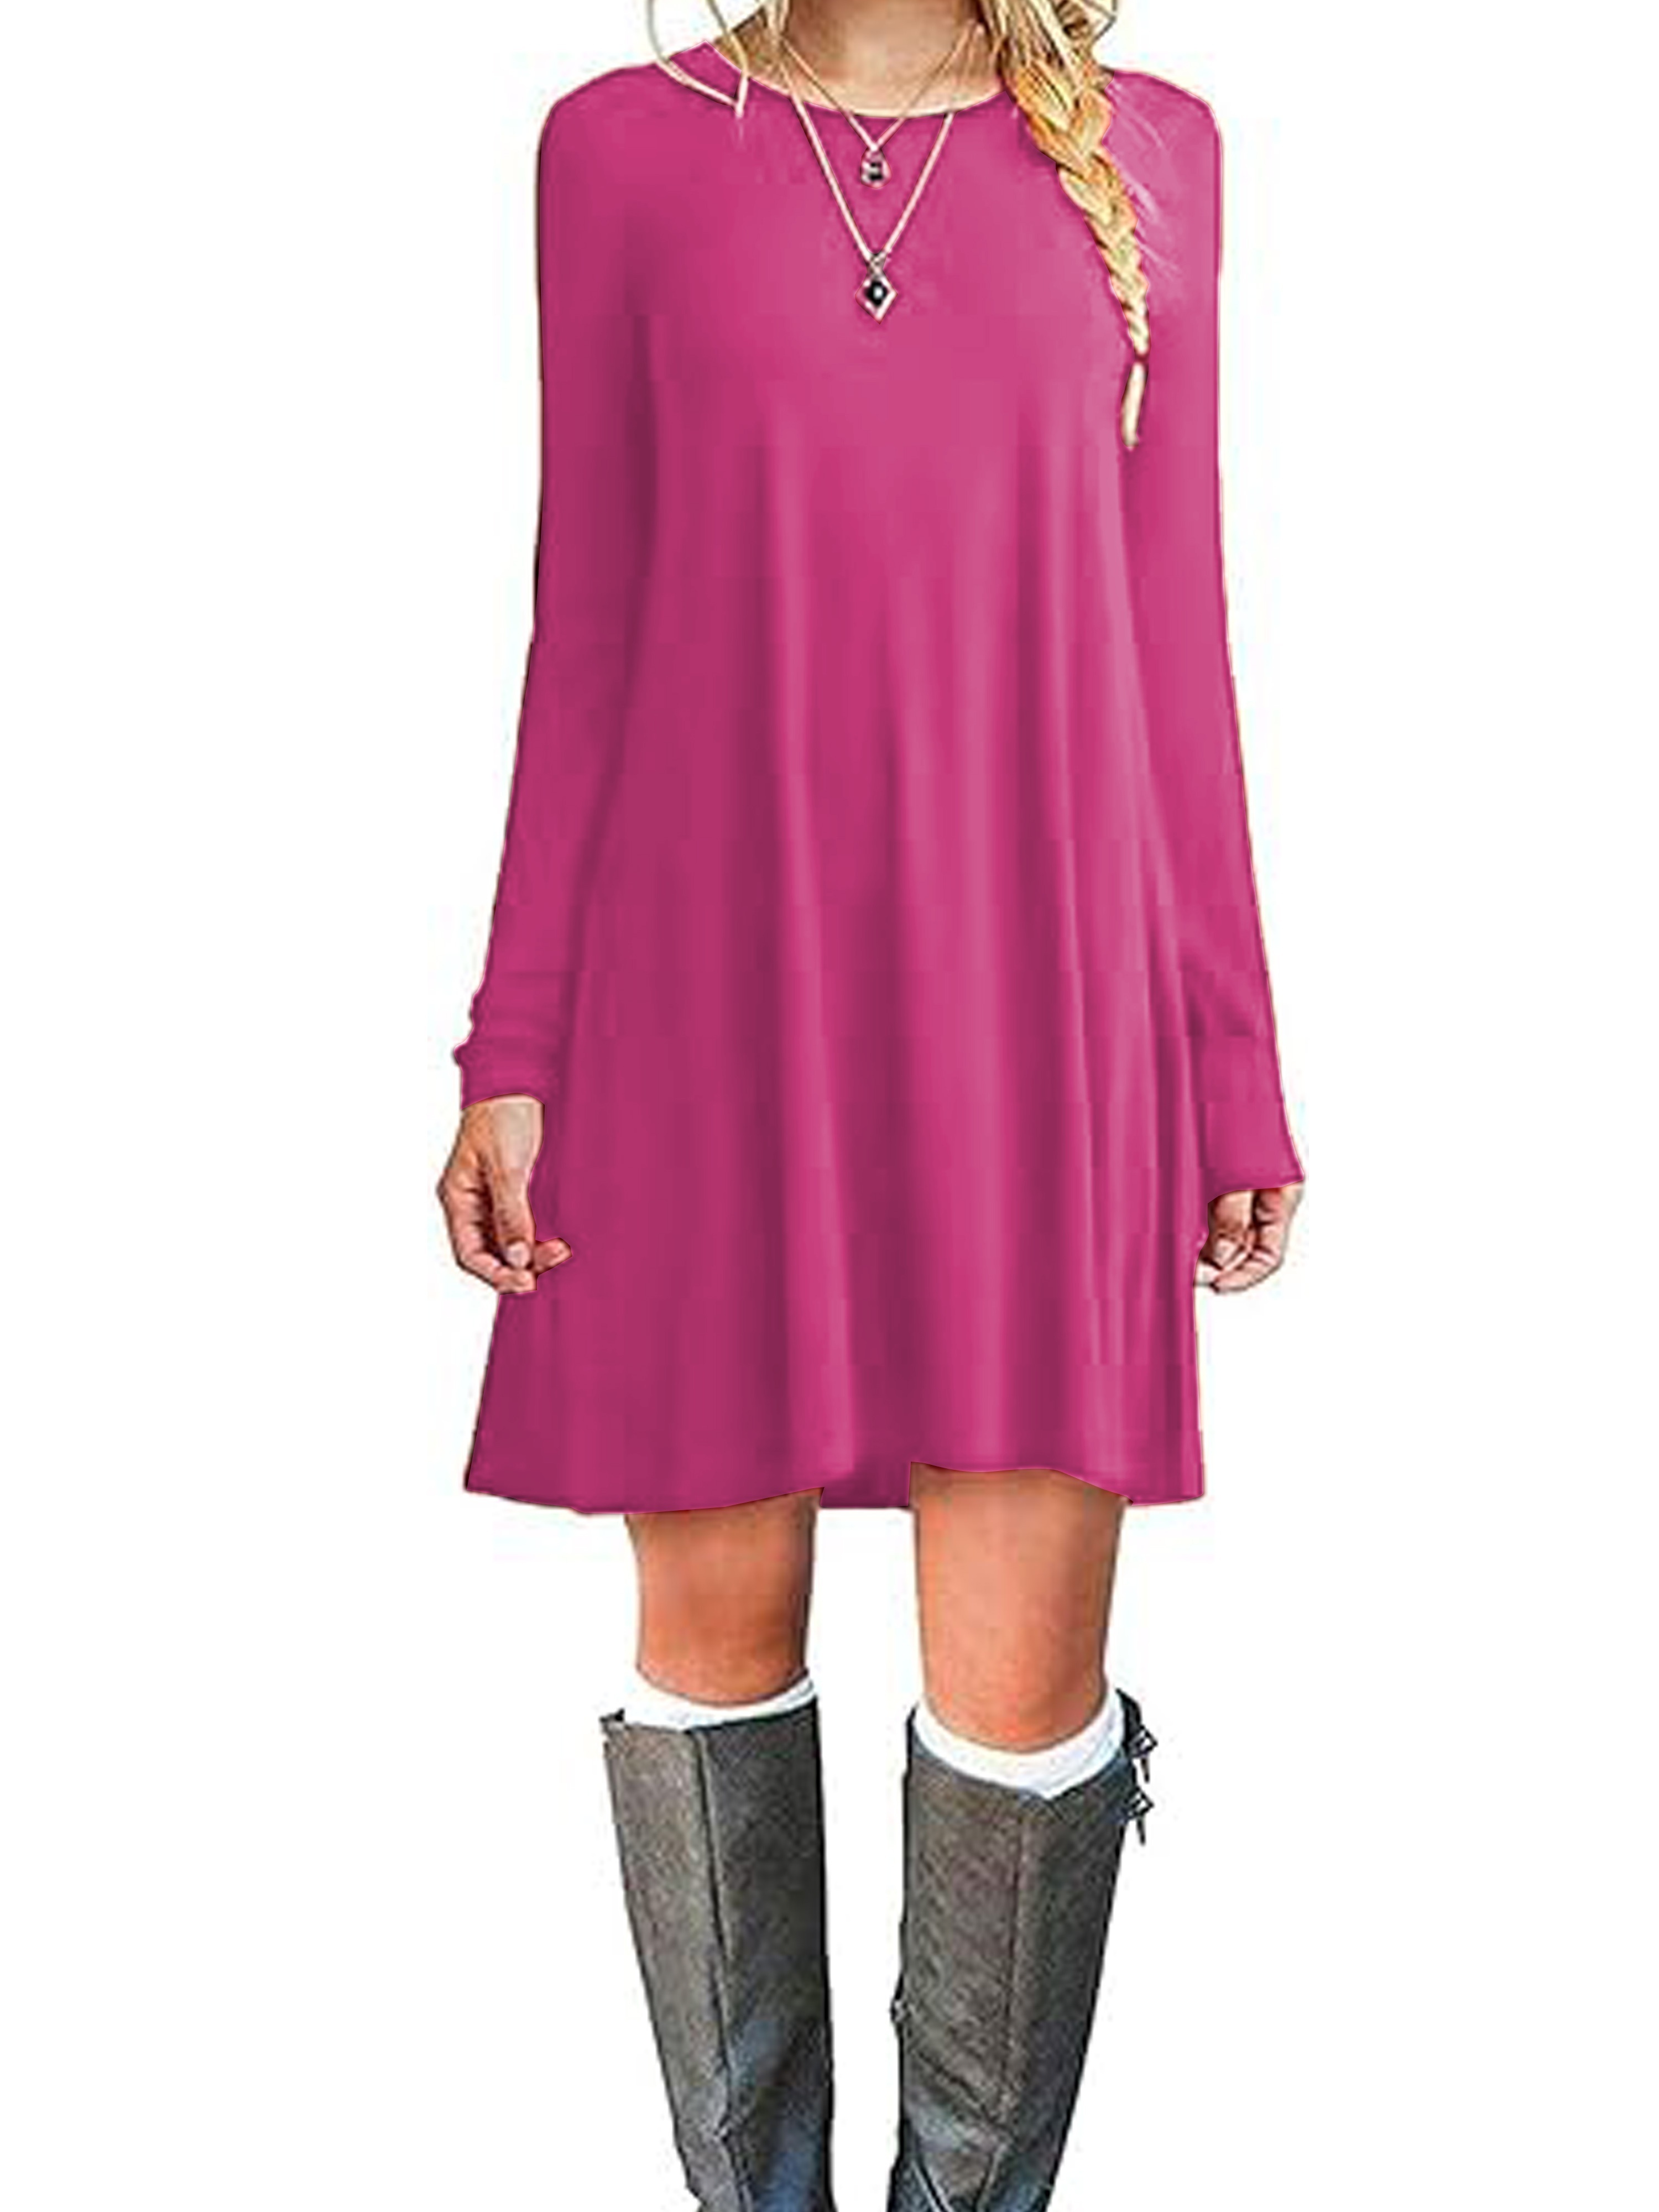 solid crew neck simple dress versatile long sleeve dress for spring fall womens clothing